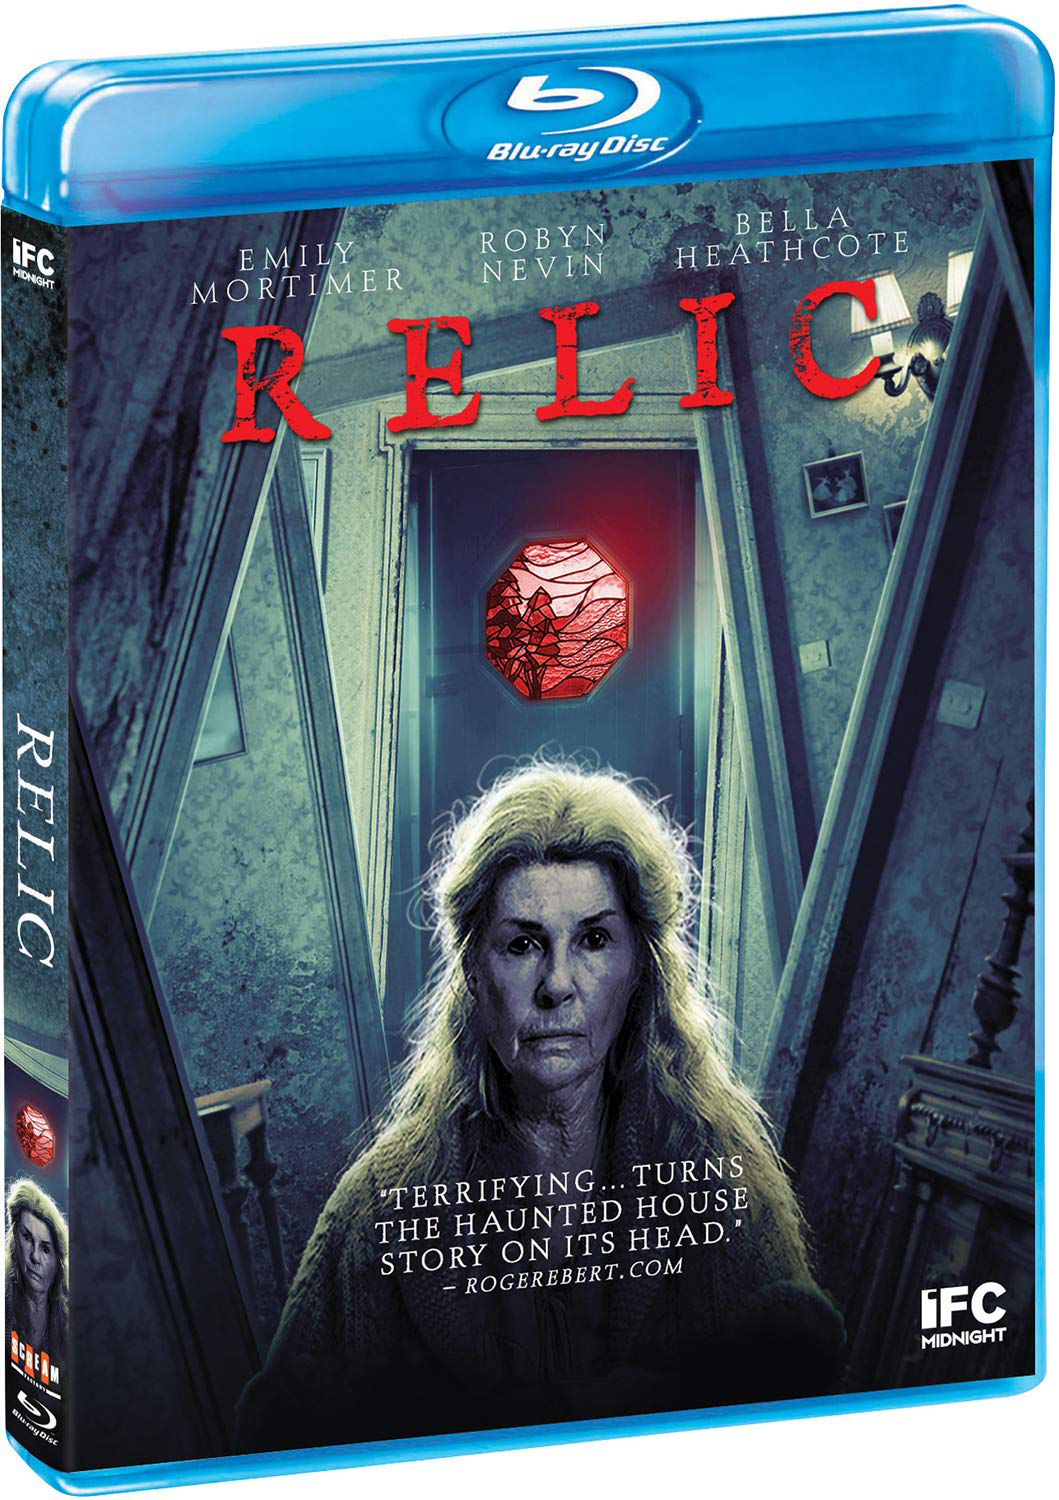 Relic (2020) on Blu-ray